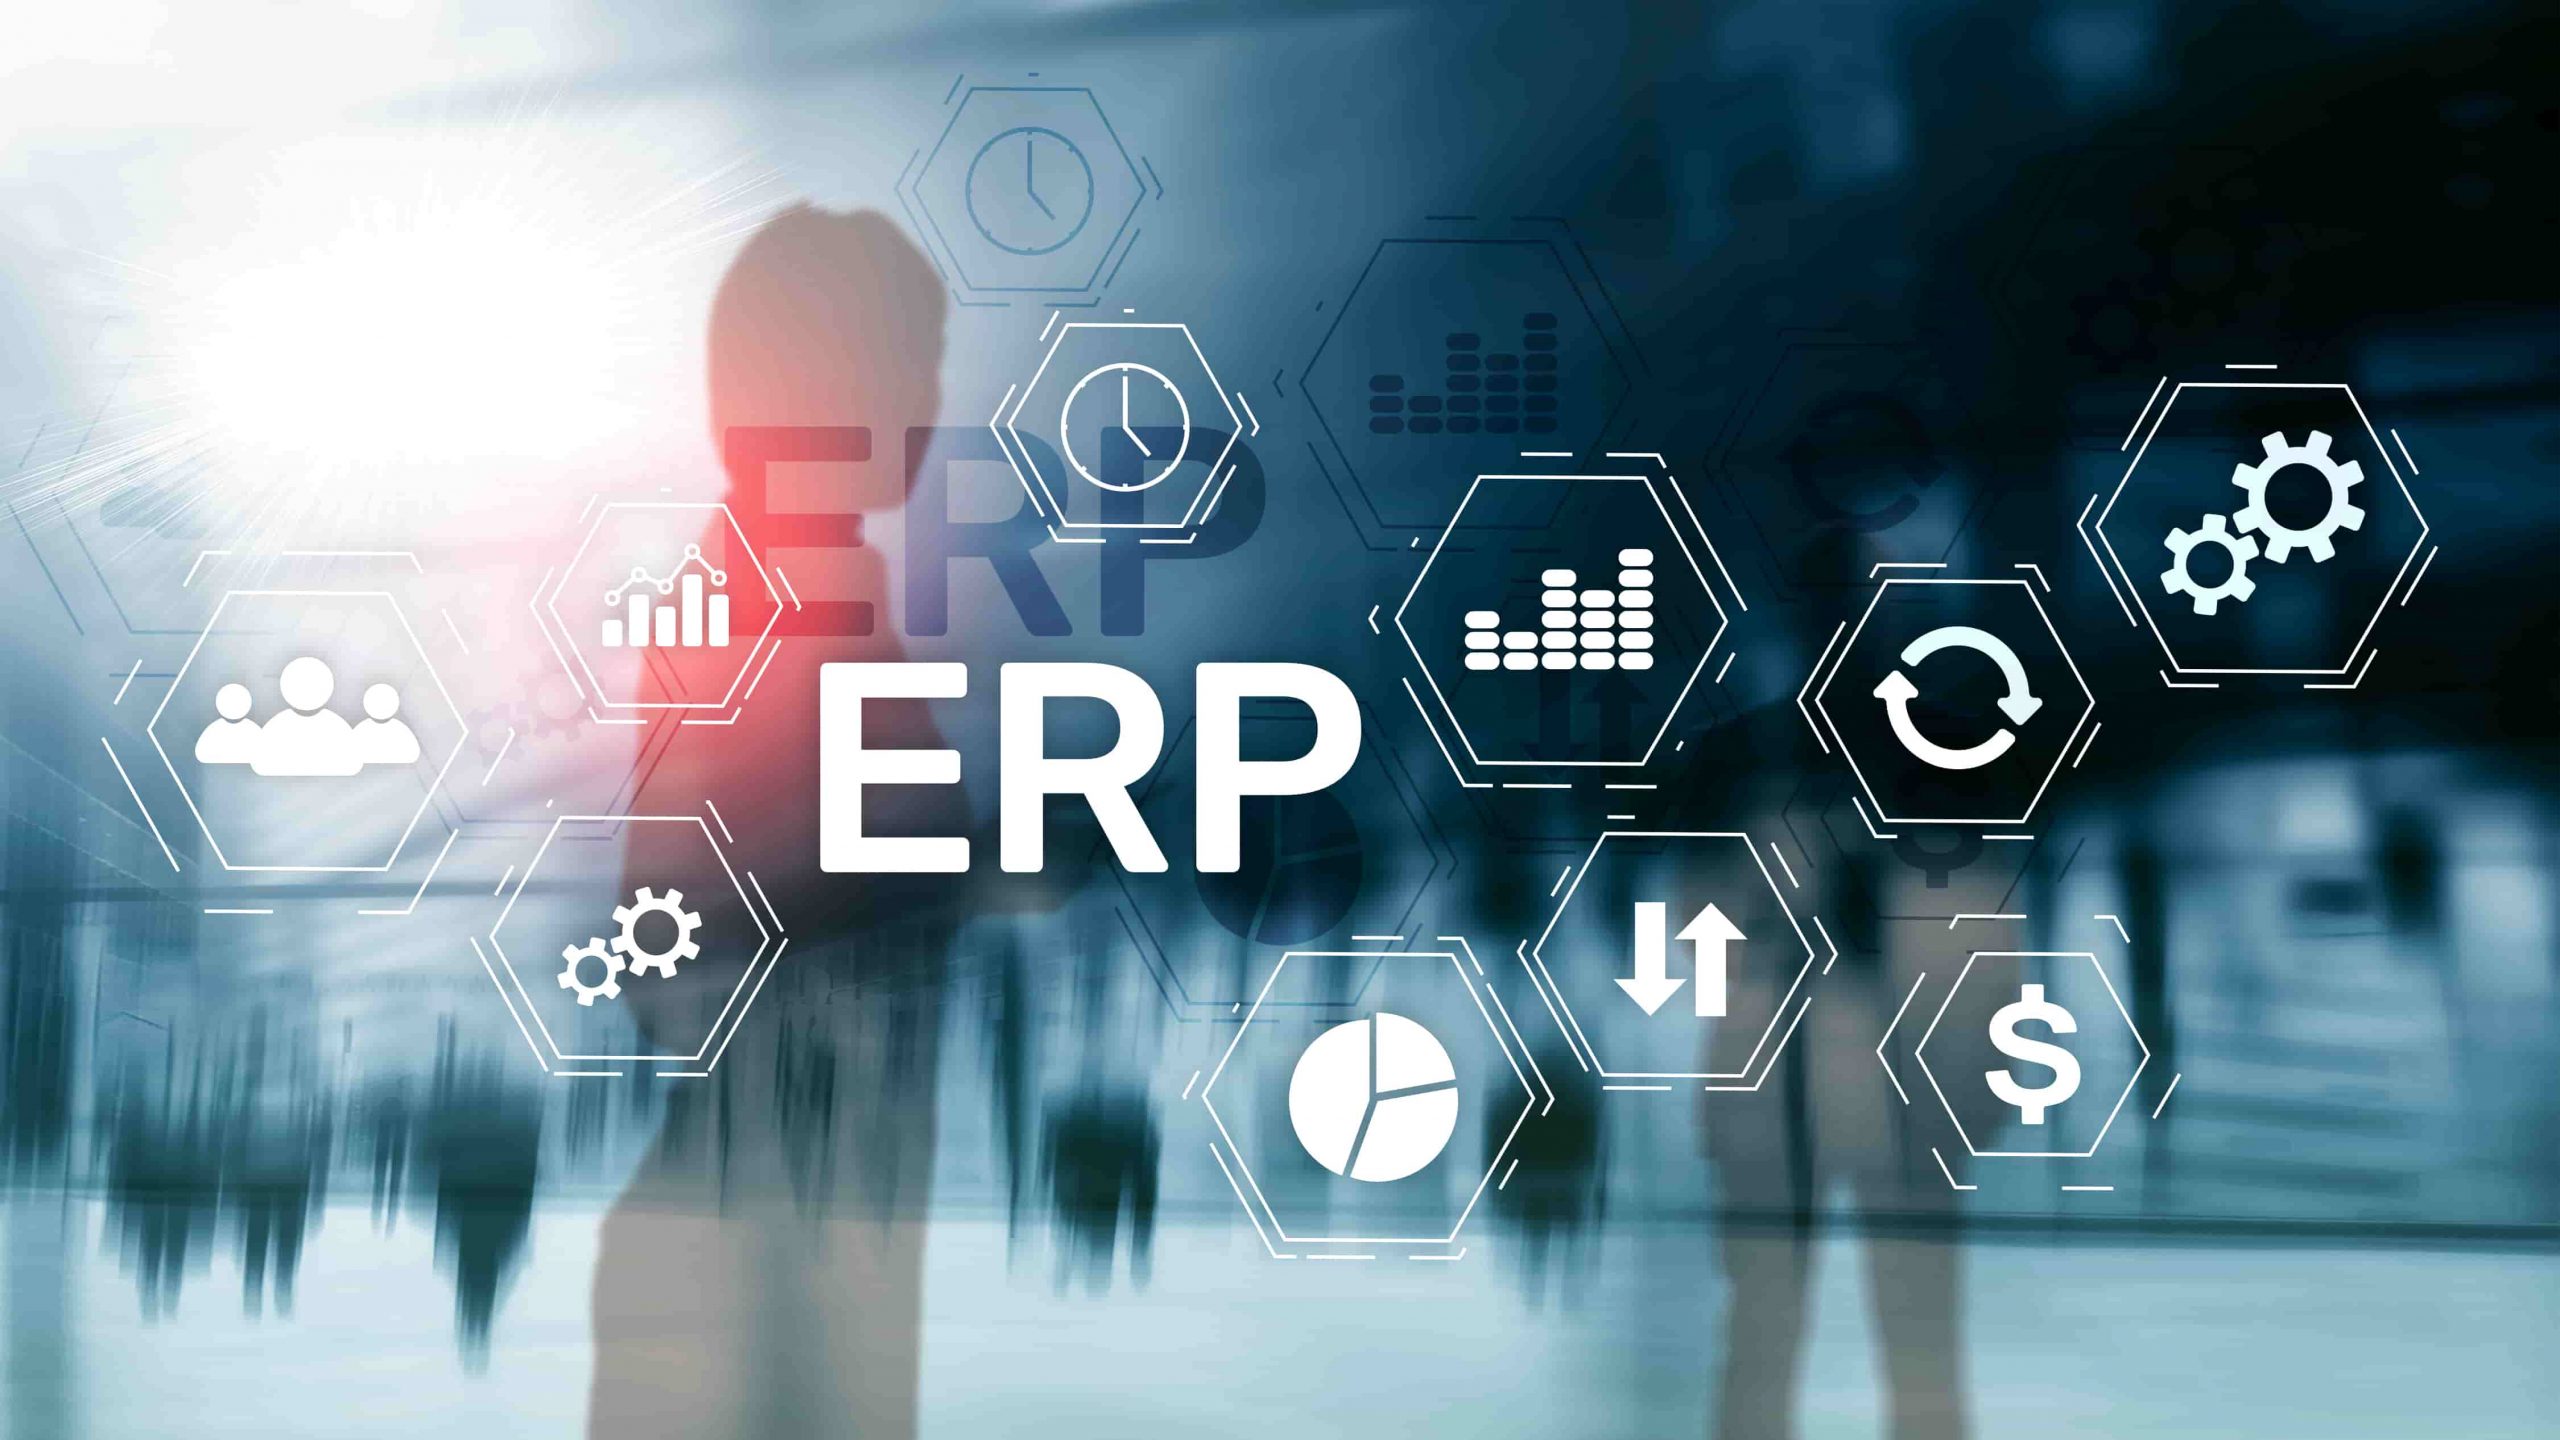 Erp solutions singapore